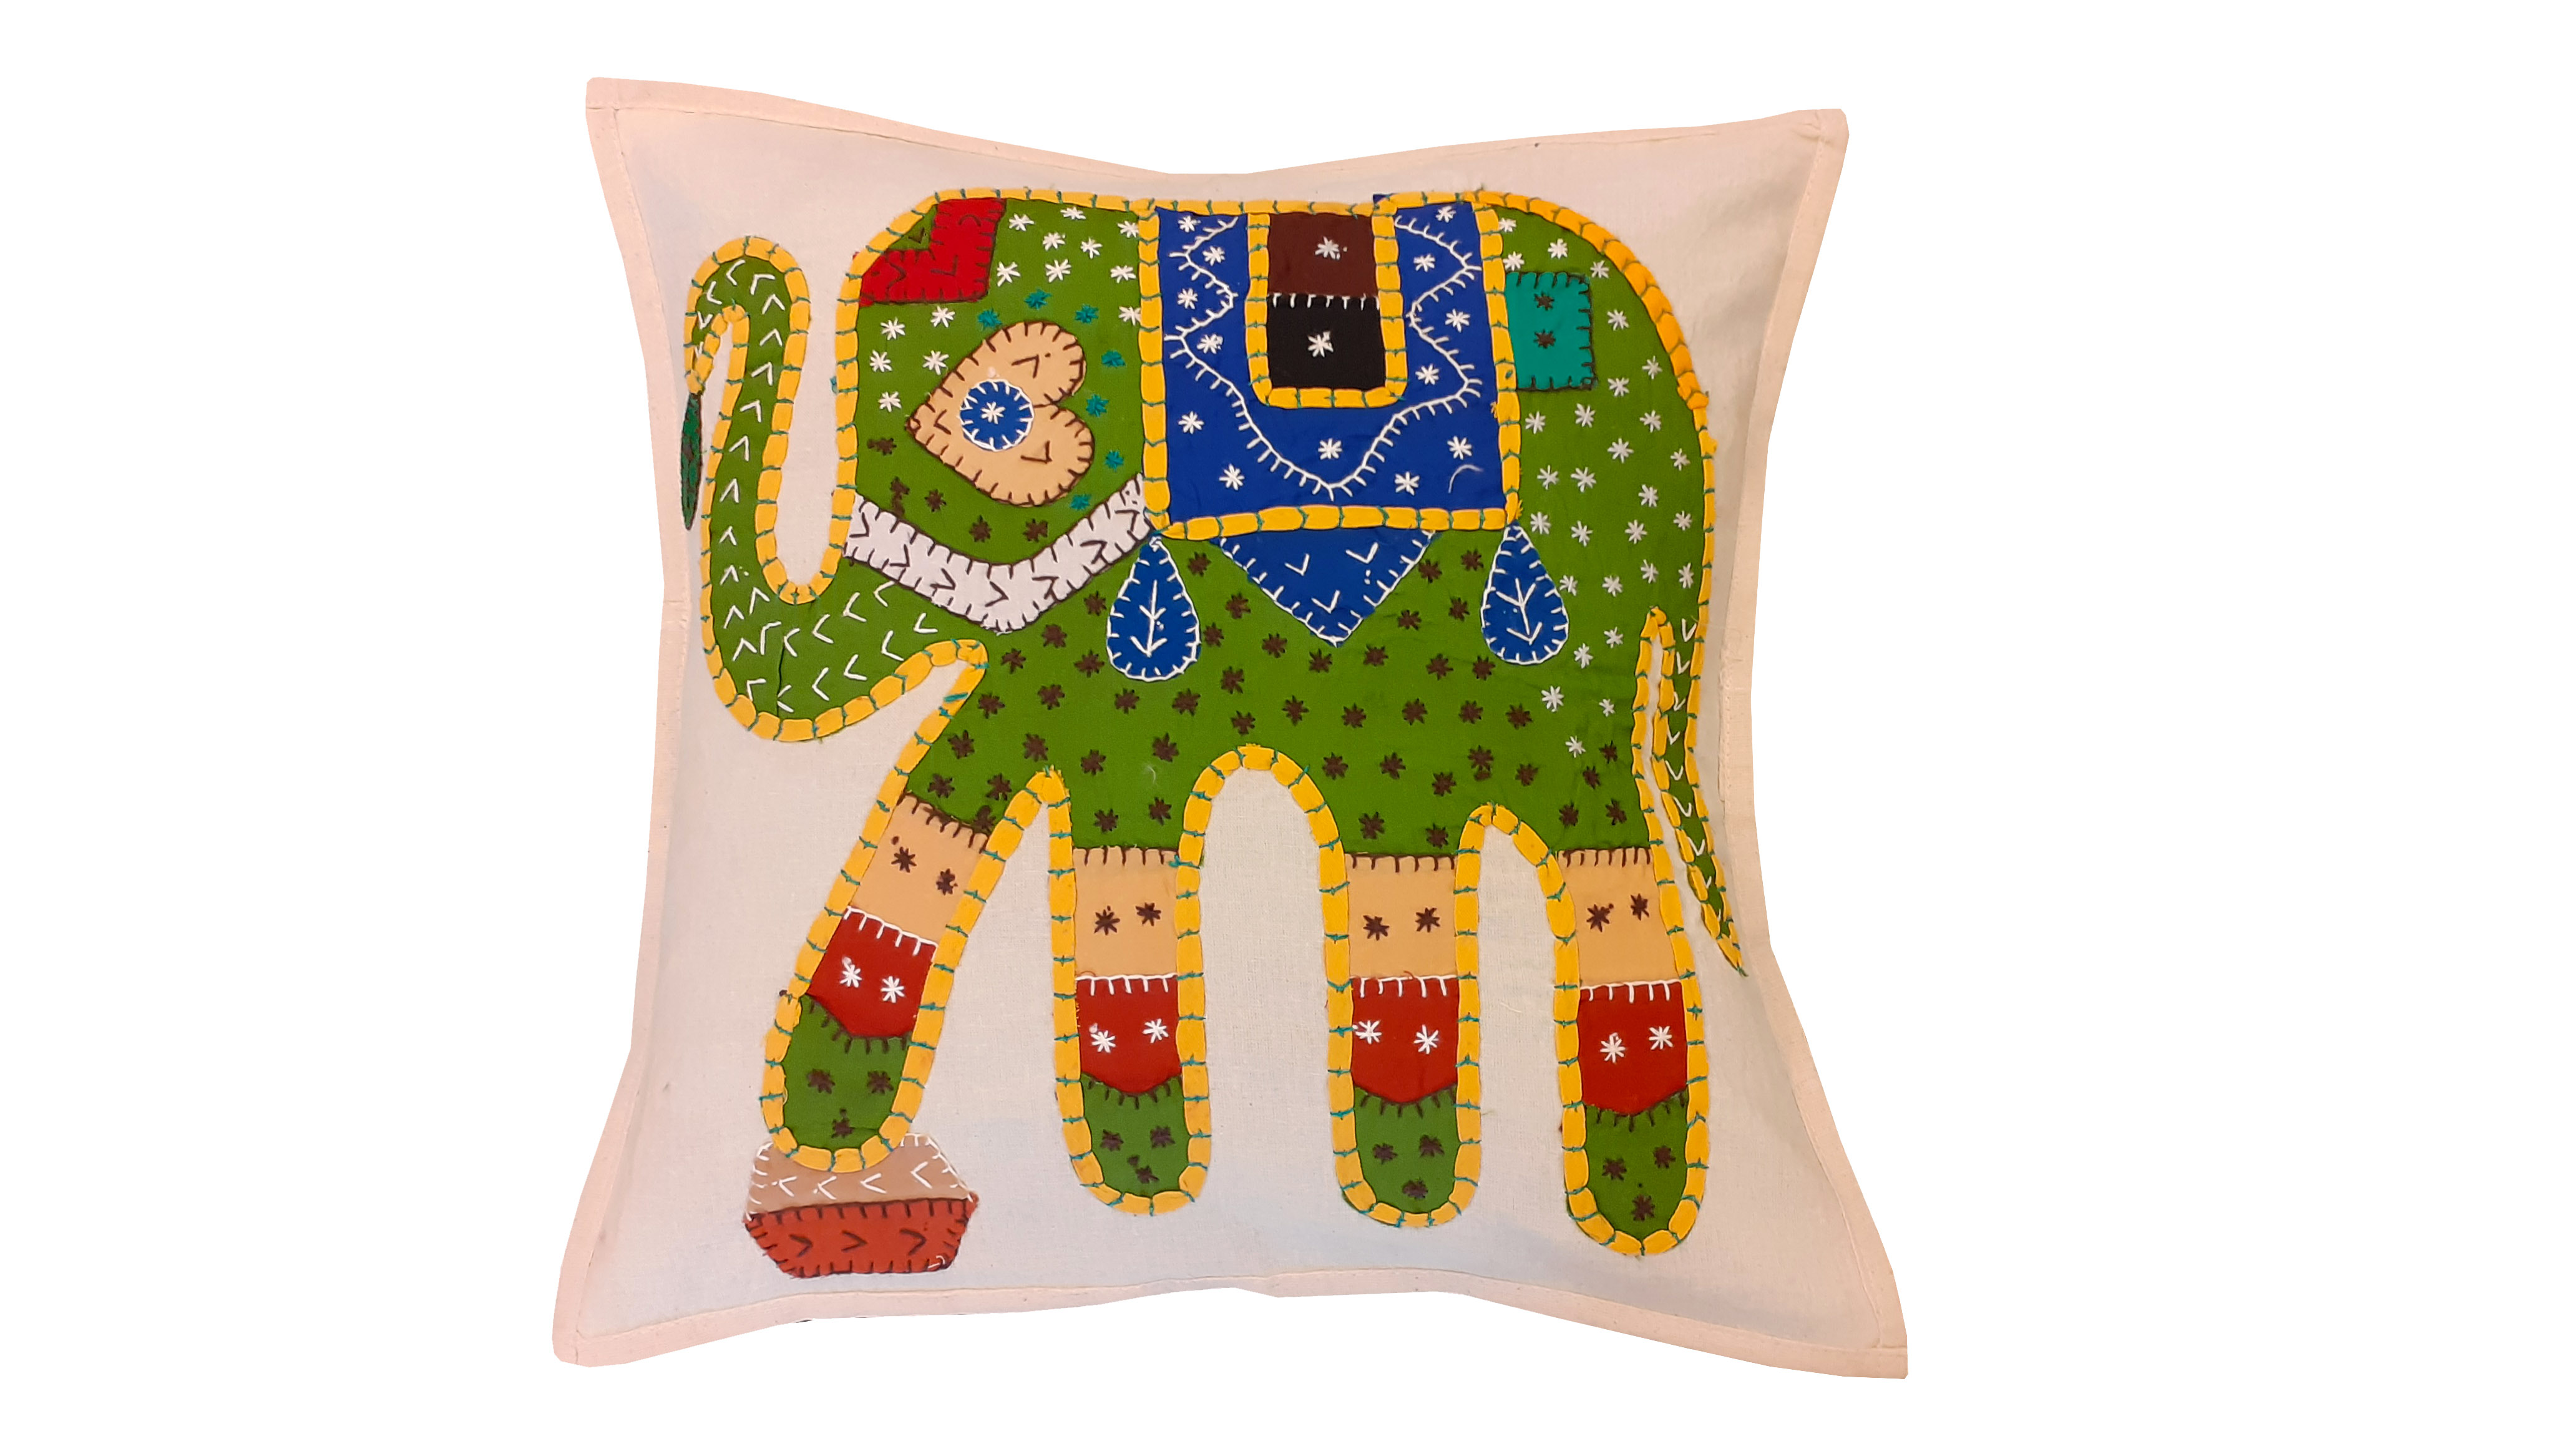 Applique Work Cotton Cushion Covers -Set of 2 - Cushions & Covers Home ...